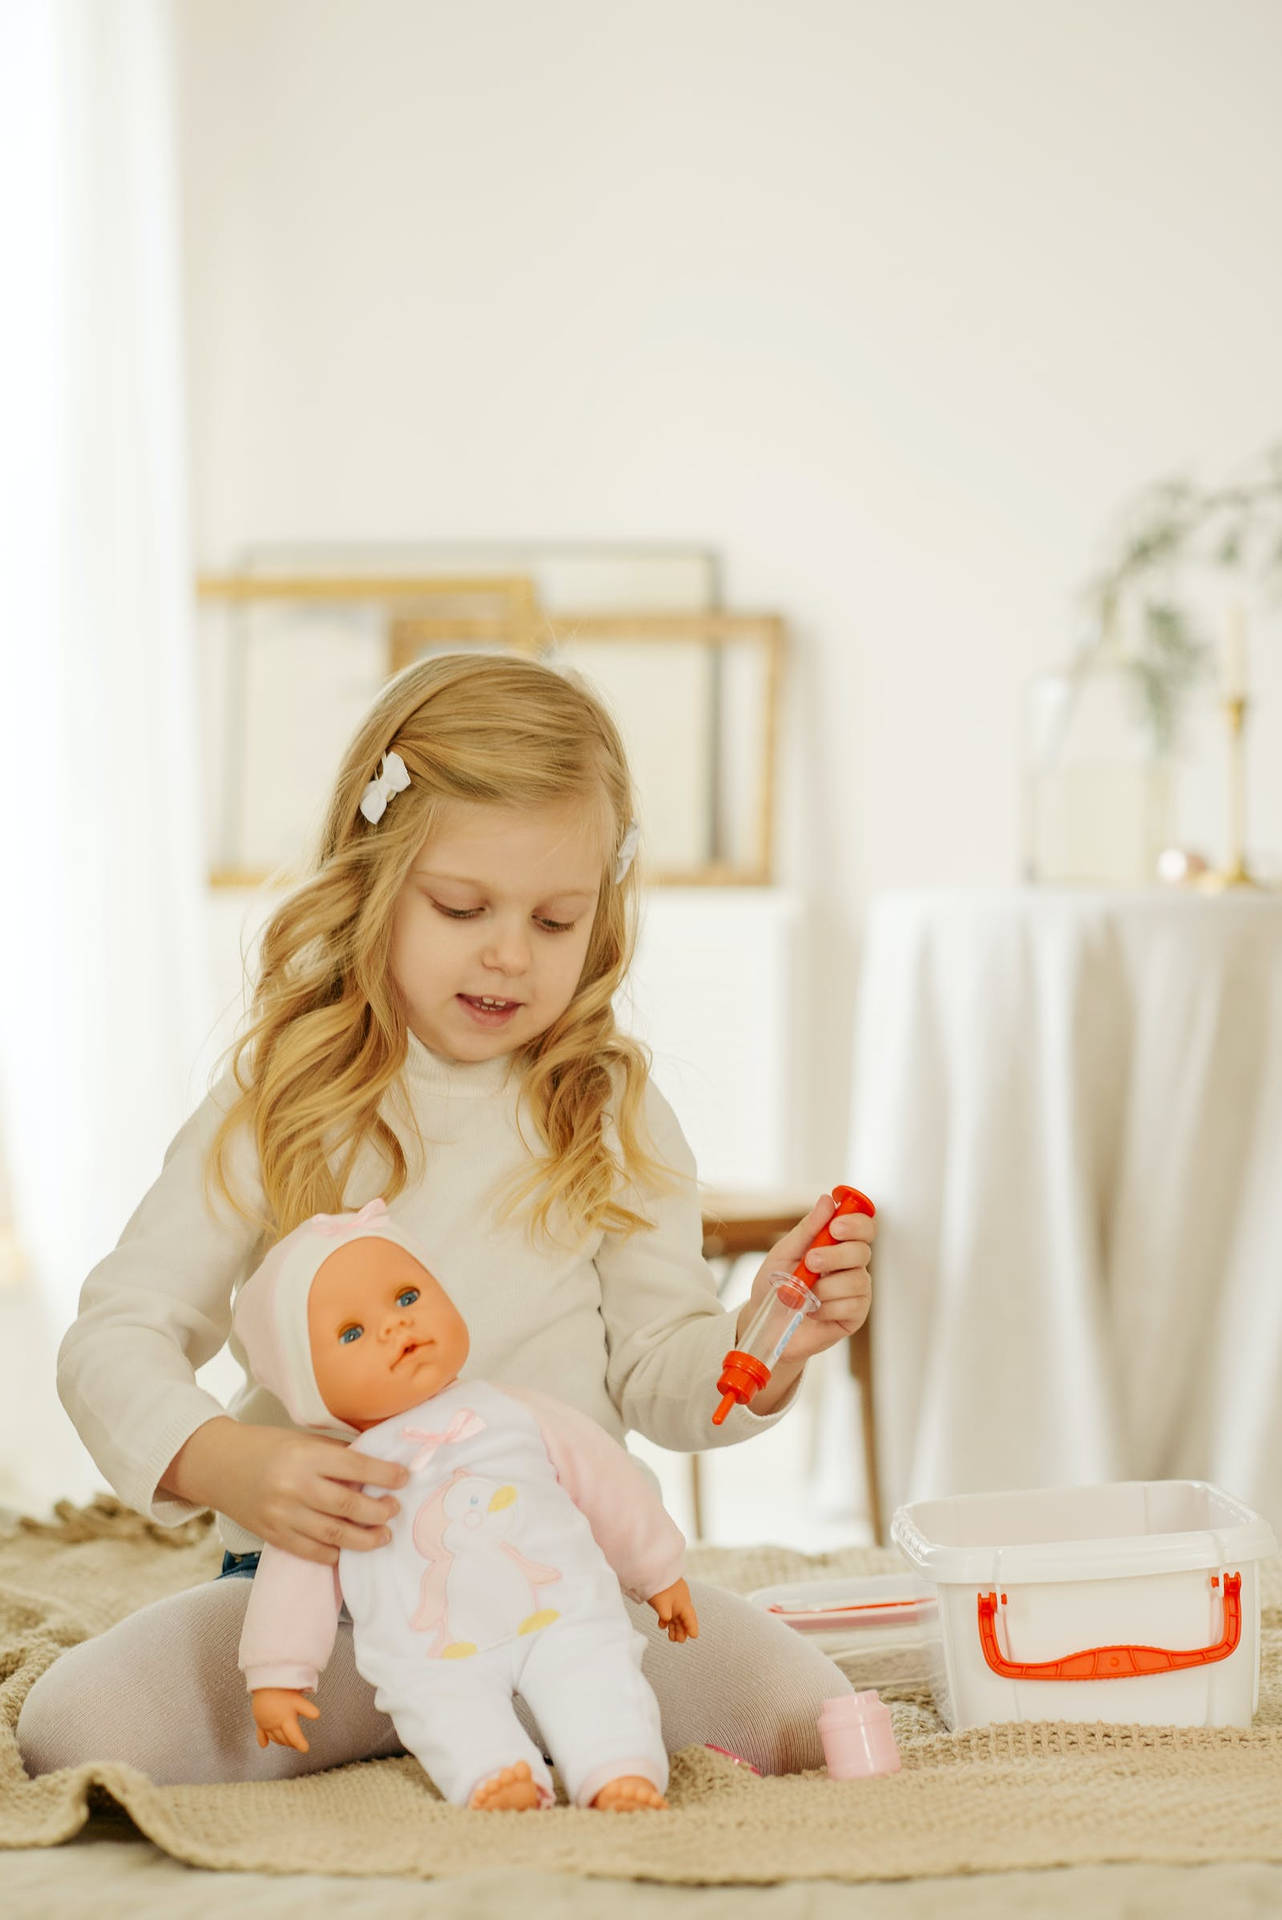 Girl Playing With Cute Doll Wallpaper